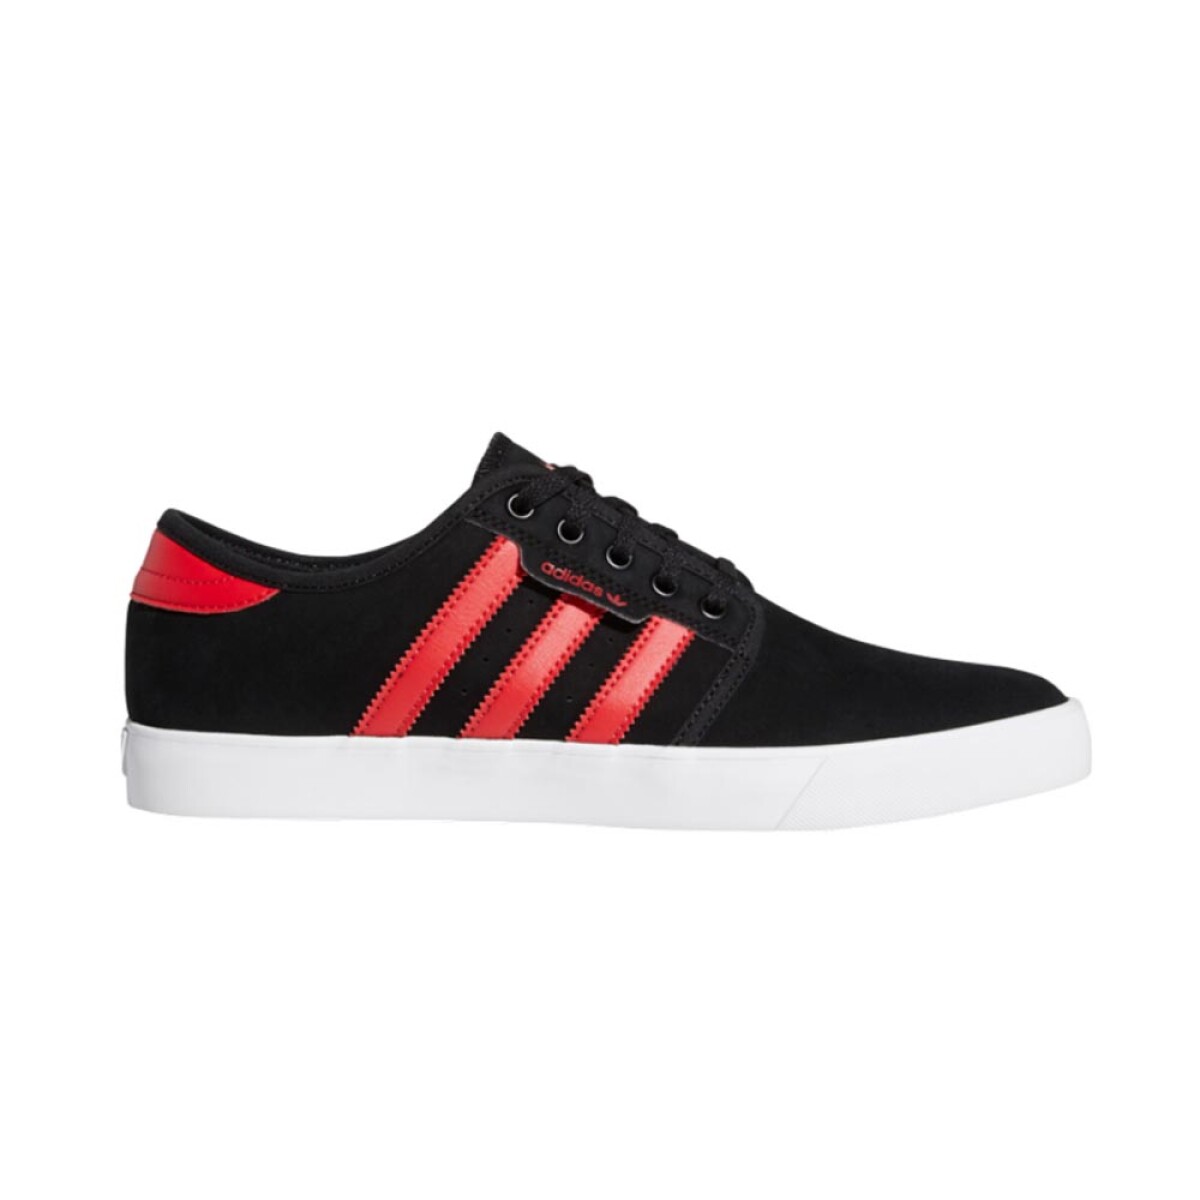 adidas SEELEY - Black/Red/White 